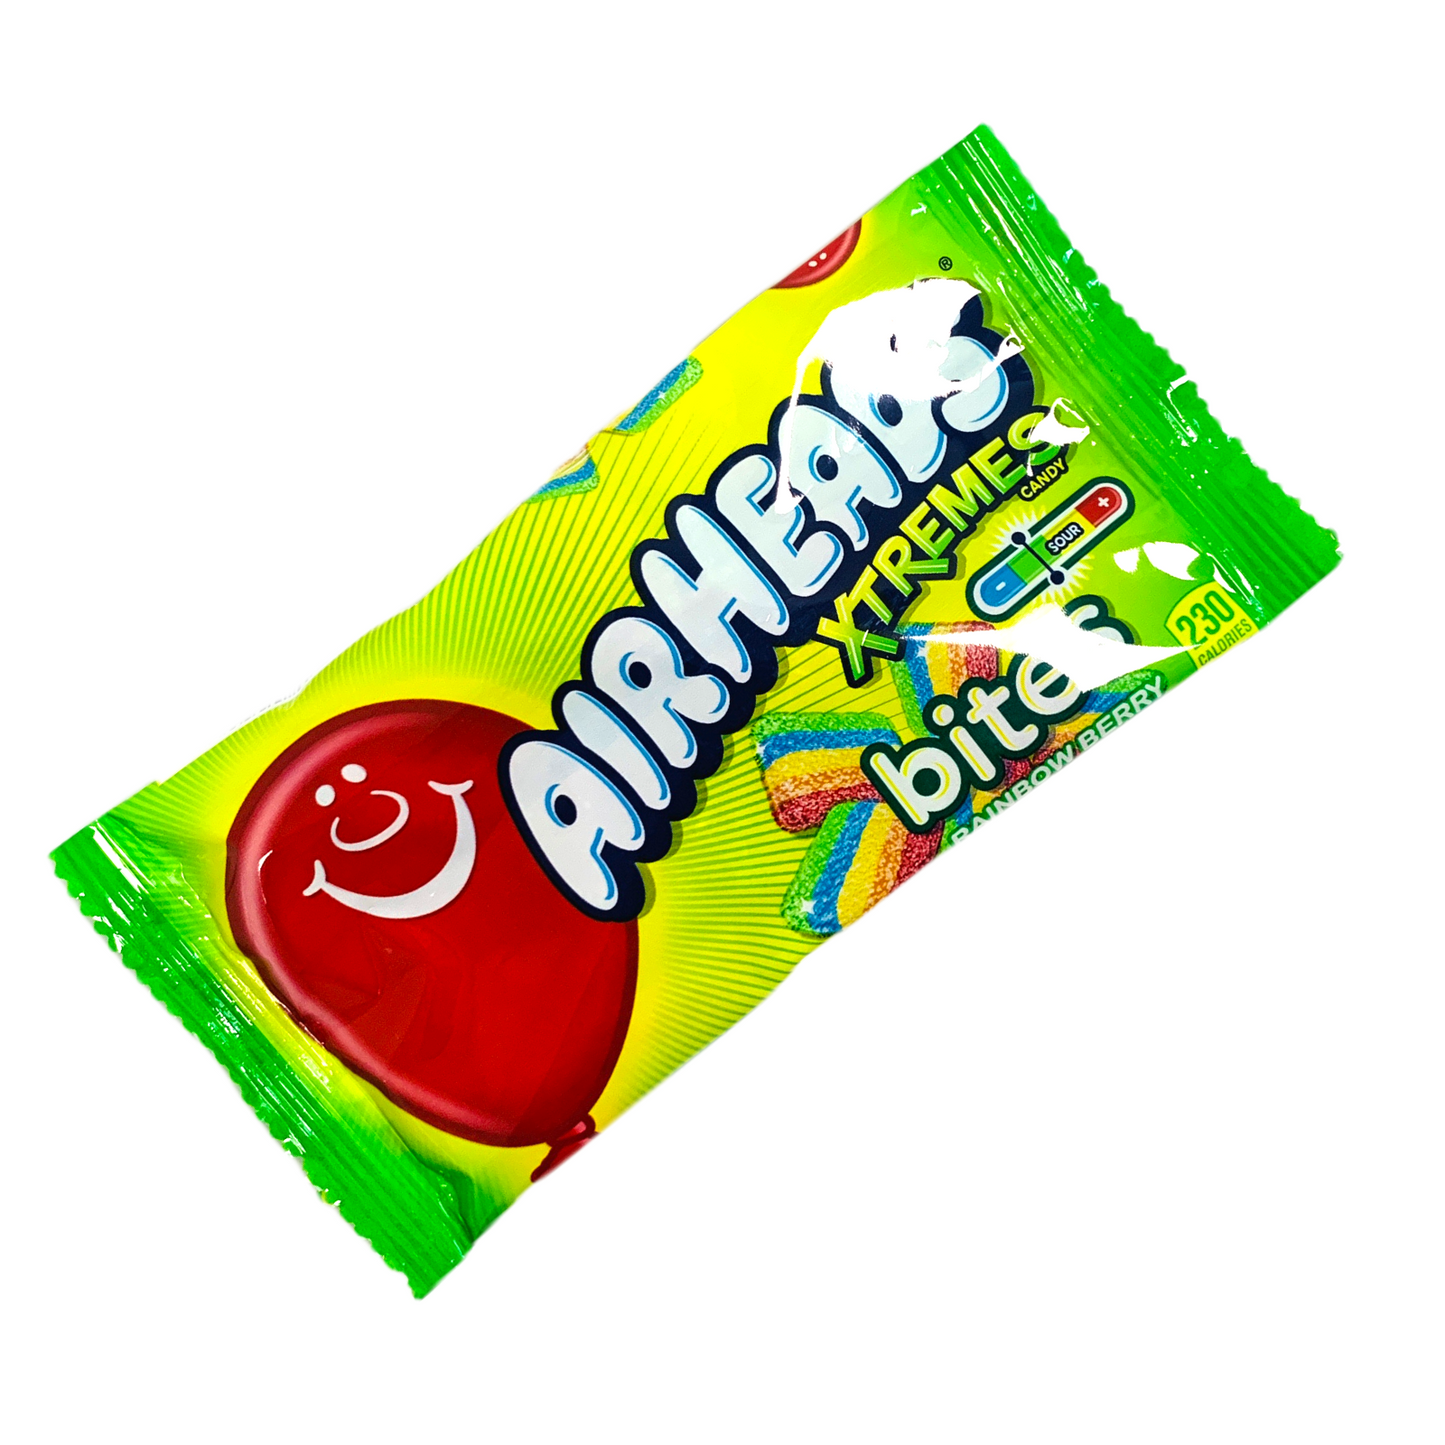 Airheads Xtremes Bites Rainbow Berry Candy 57g by American Grocer in the UK